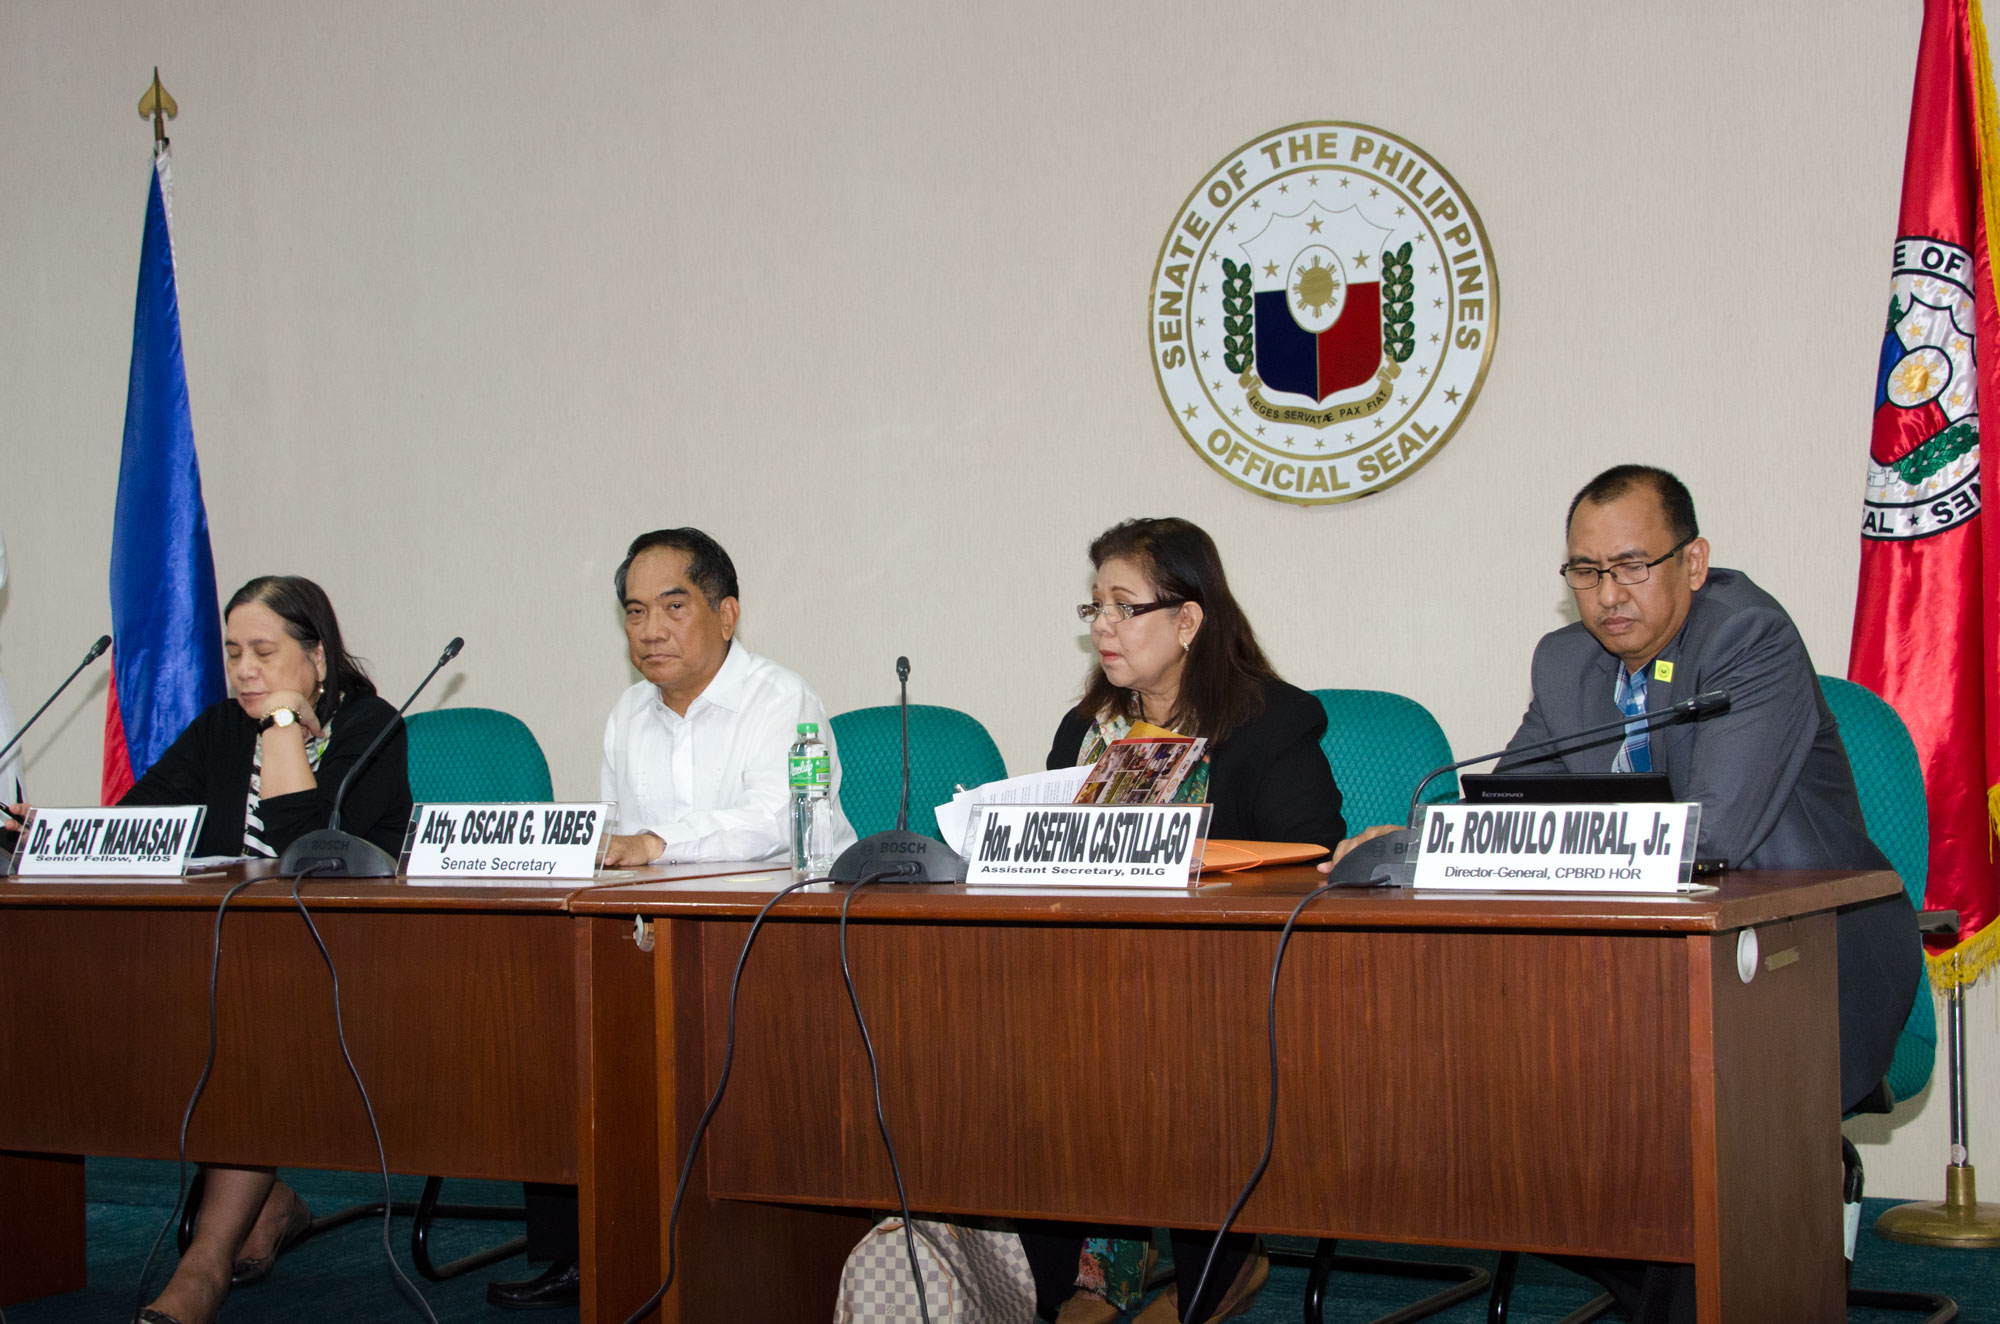 Senate Centennial Lecture Series Assessment Of The Bottom-Up Budgeting Process For FY 2015-GGM_7870.jpg